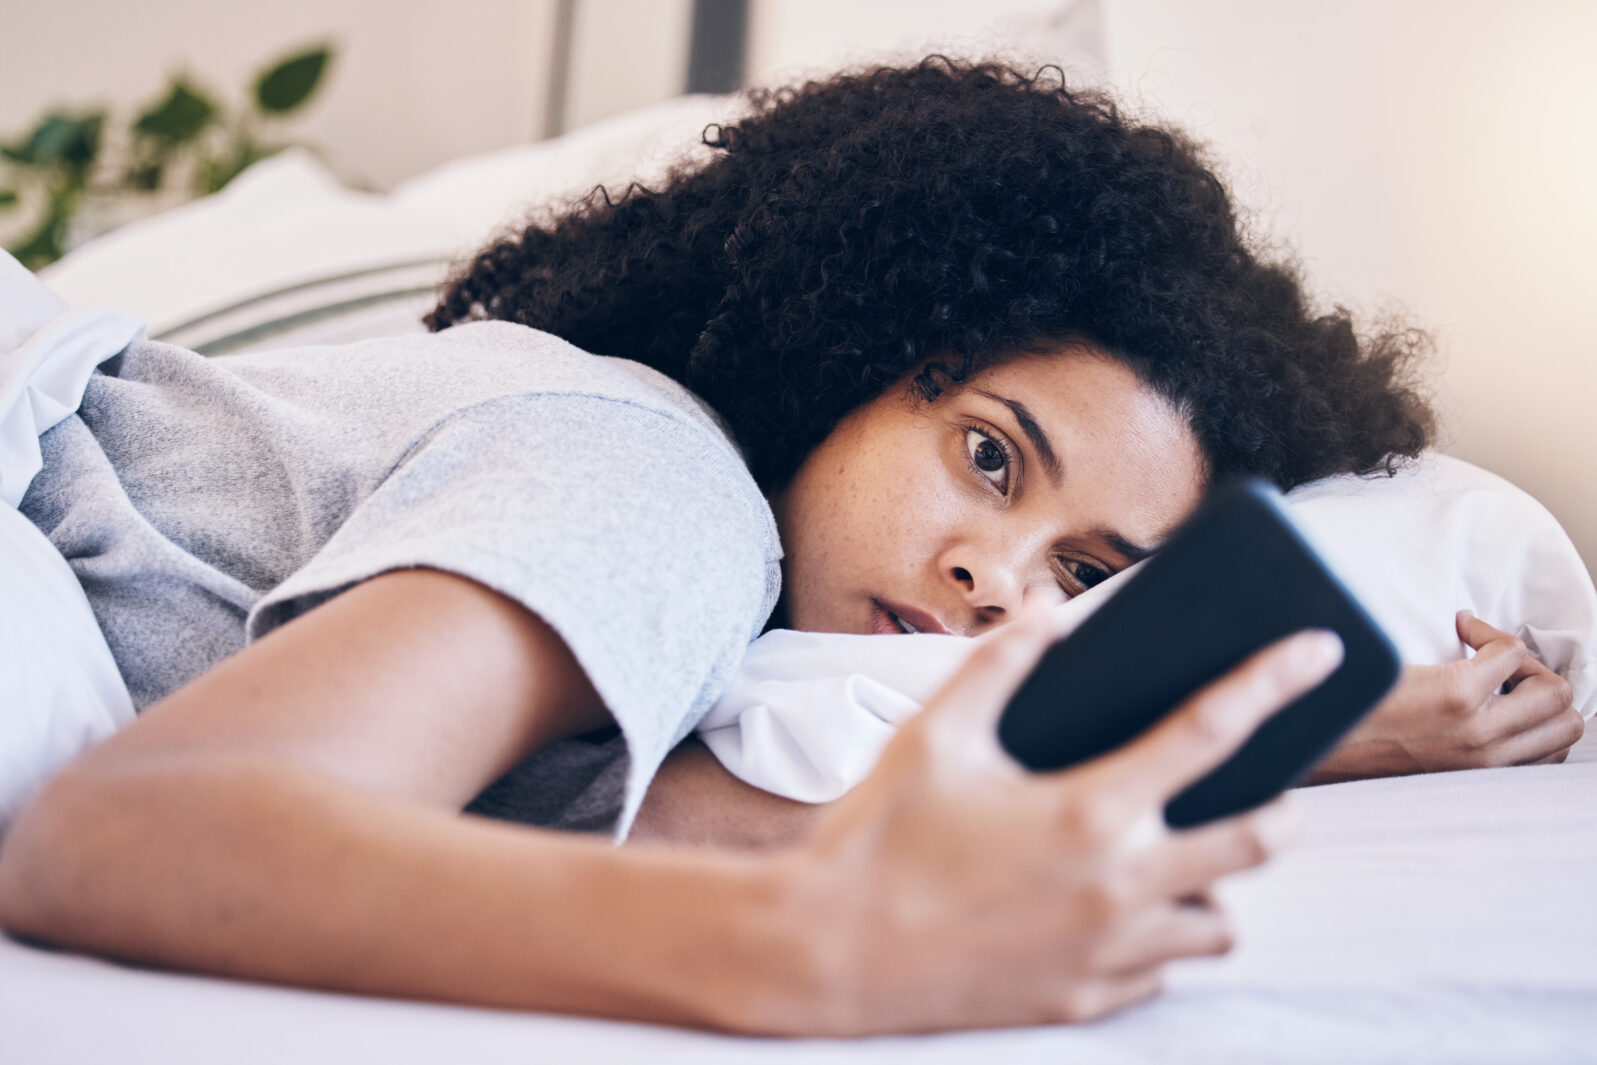 Cellphone, mental health and woman in her bed with depression while watching videos on social media. Tired, sleepy and depressed female with insomnia networking on a phone in her bedroom at home.